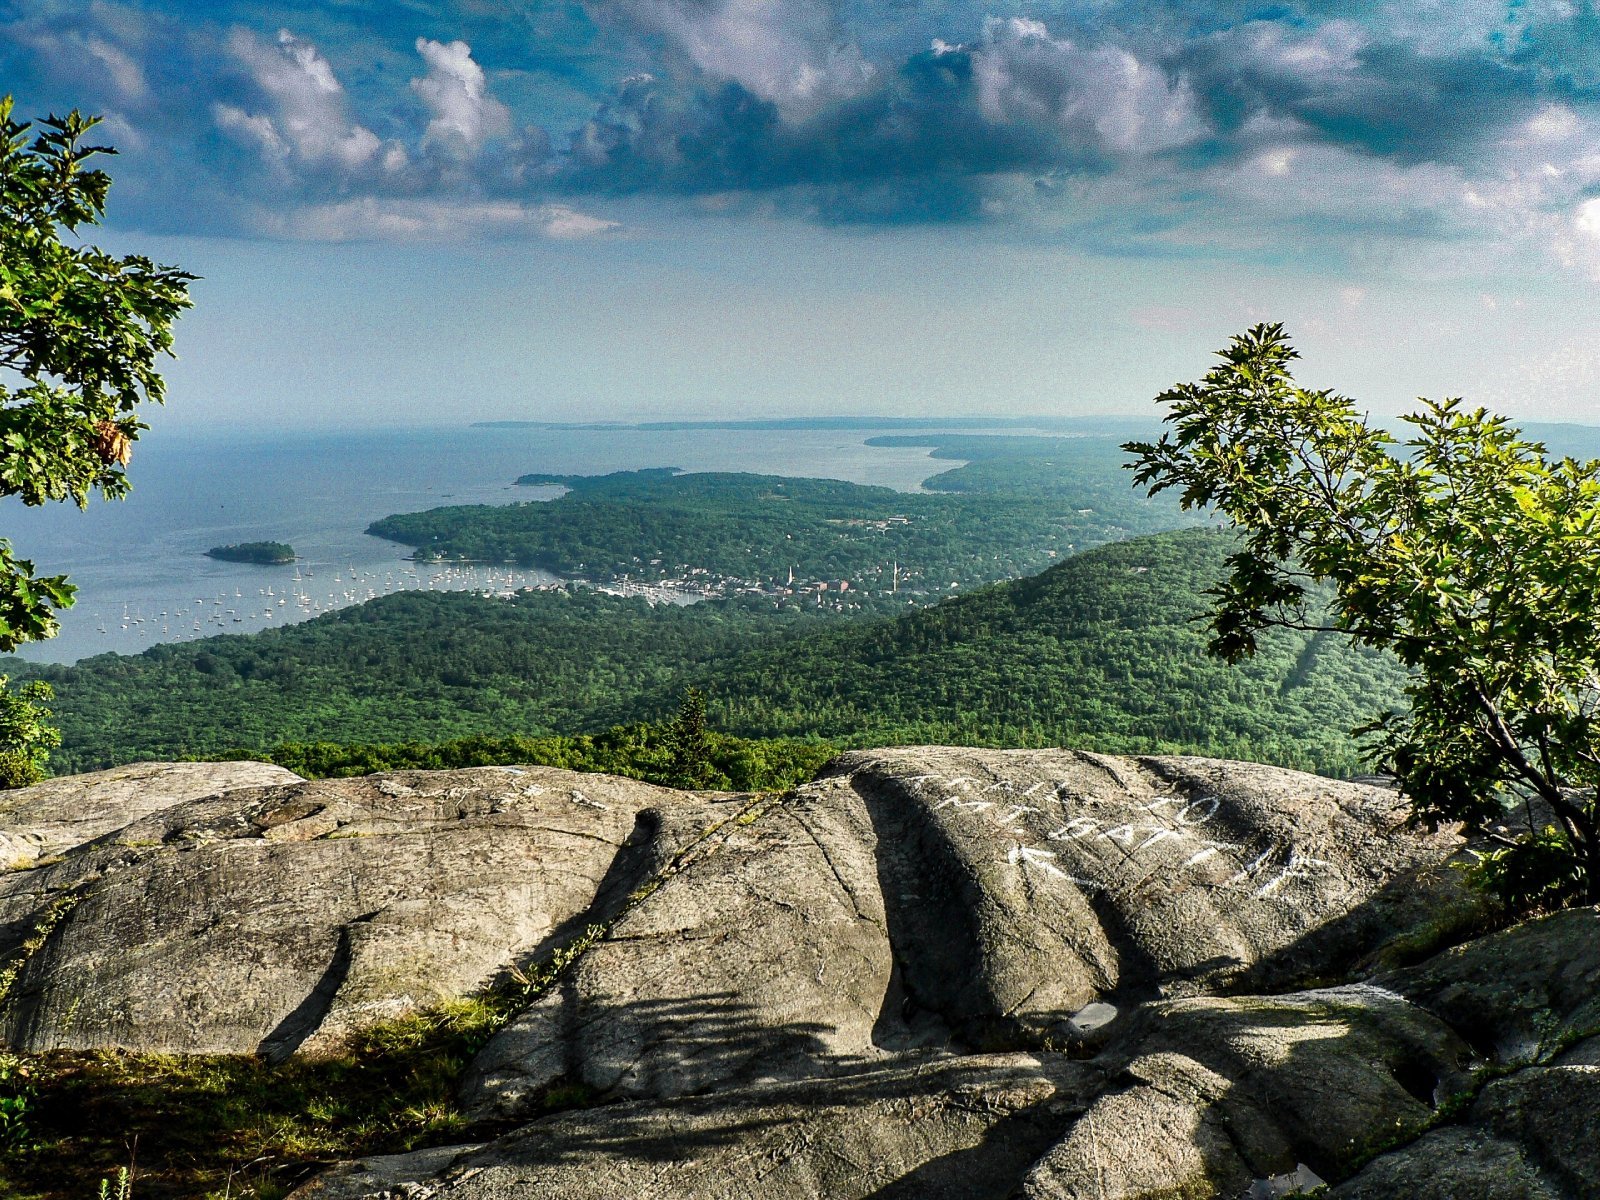 <p class="wp-caption-text">Image Credit: Shutterstock / Richard345</p>  <p>Hike or drive to the top of Mount Battie in Camden Hills State Park for unparalleled views of Penobscot Bay. It’s a slice of heaven for nature lovers, with accommodations ranging from cozy B&Bs to camping sites.</p>